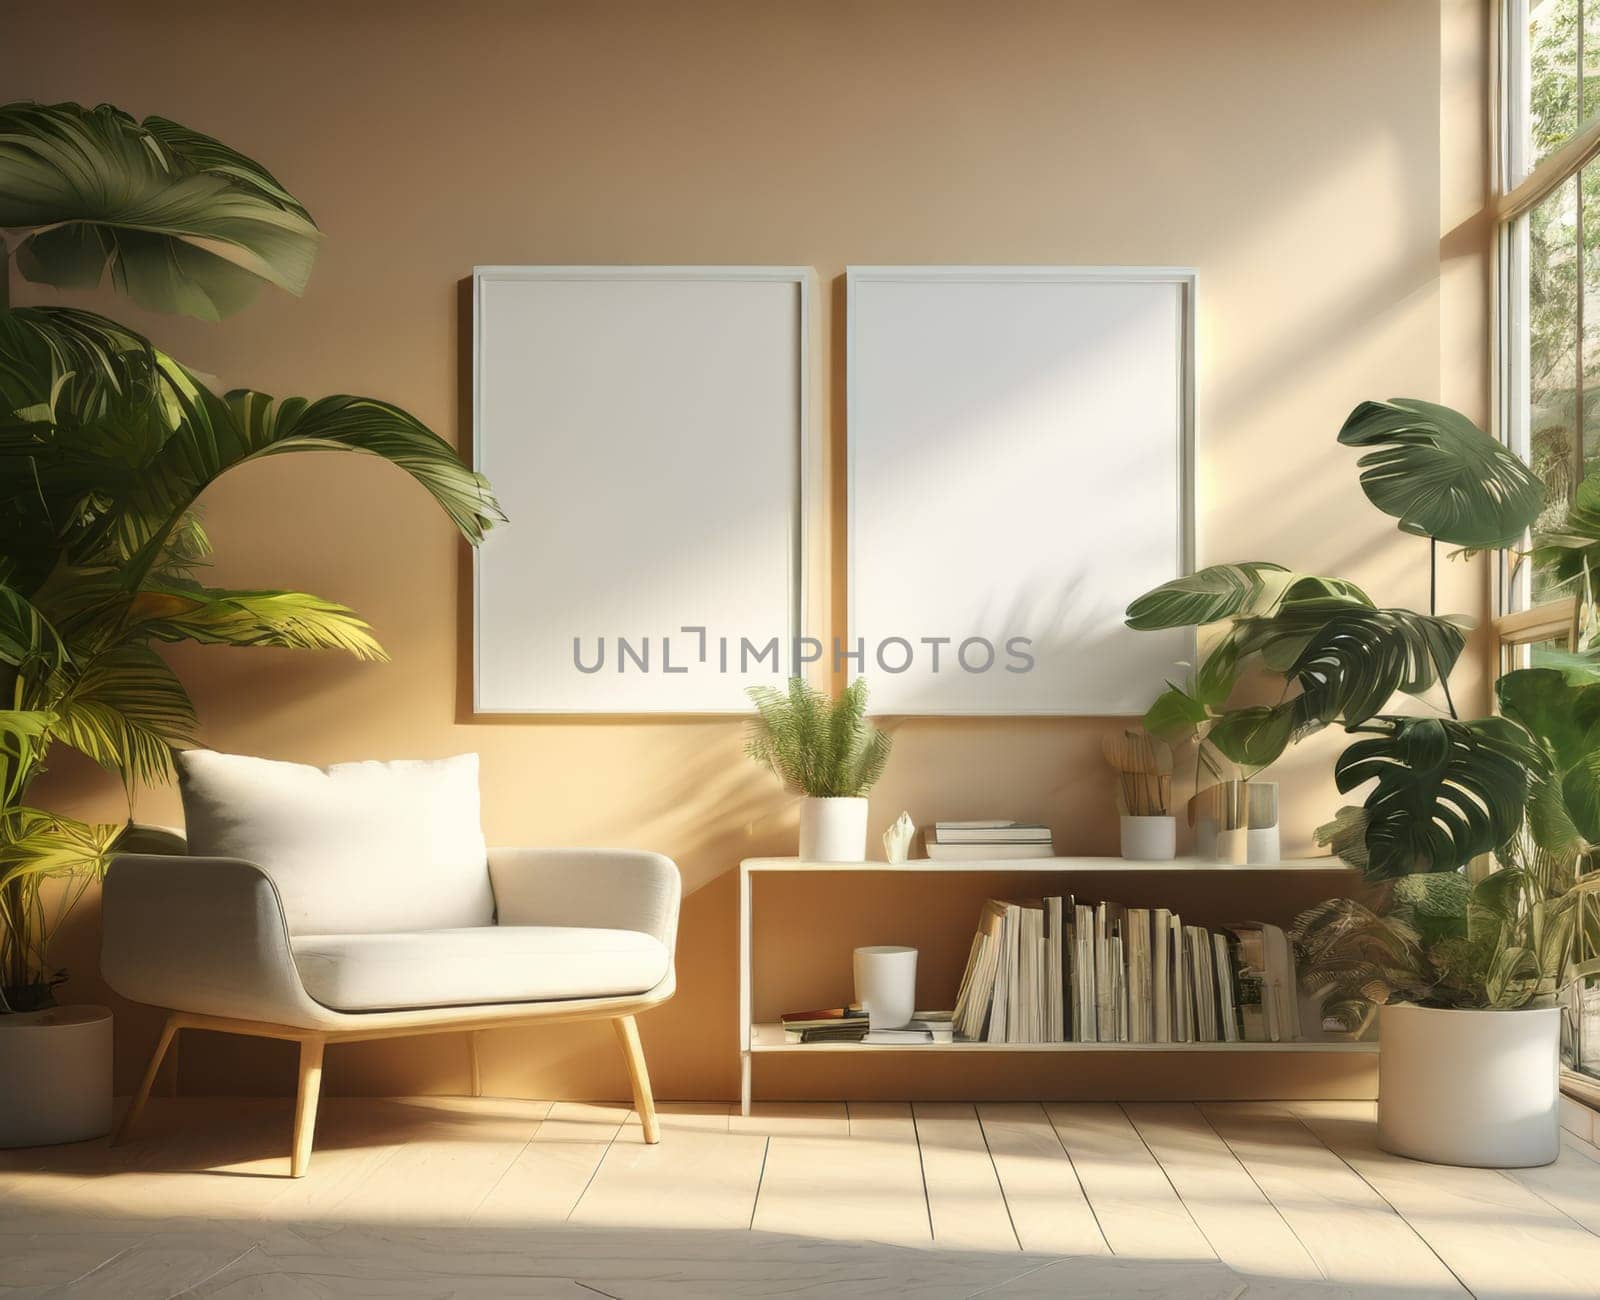 Mock up two picture frame in living room interior with urban jungle. Two white vertical empty picture frame on wall in scandinavian and boho style room interior with many natural potted plants